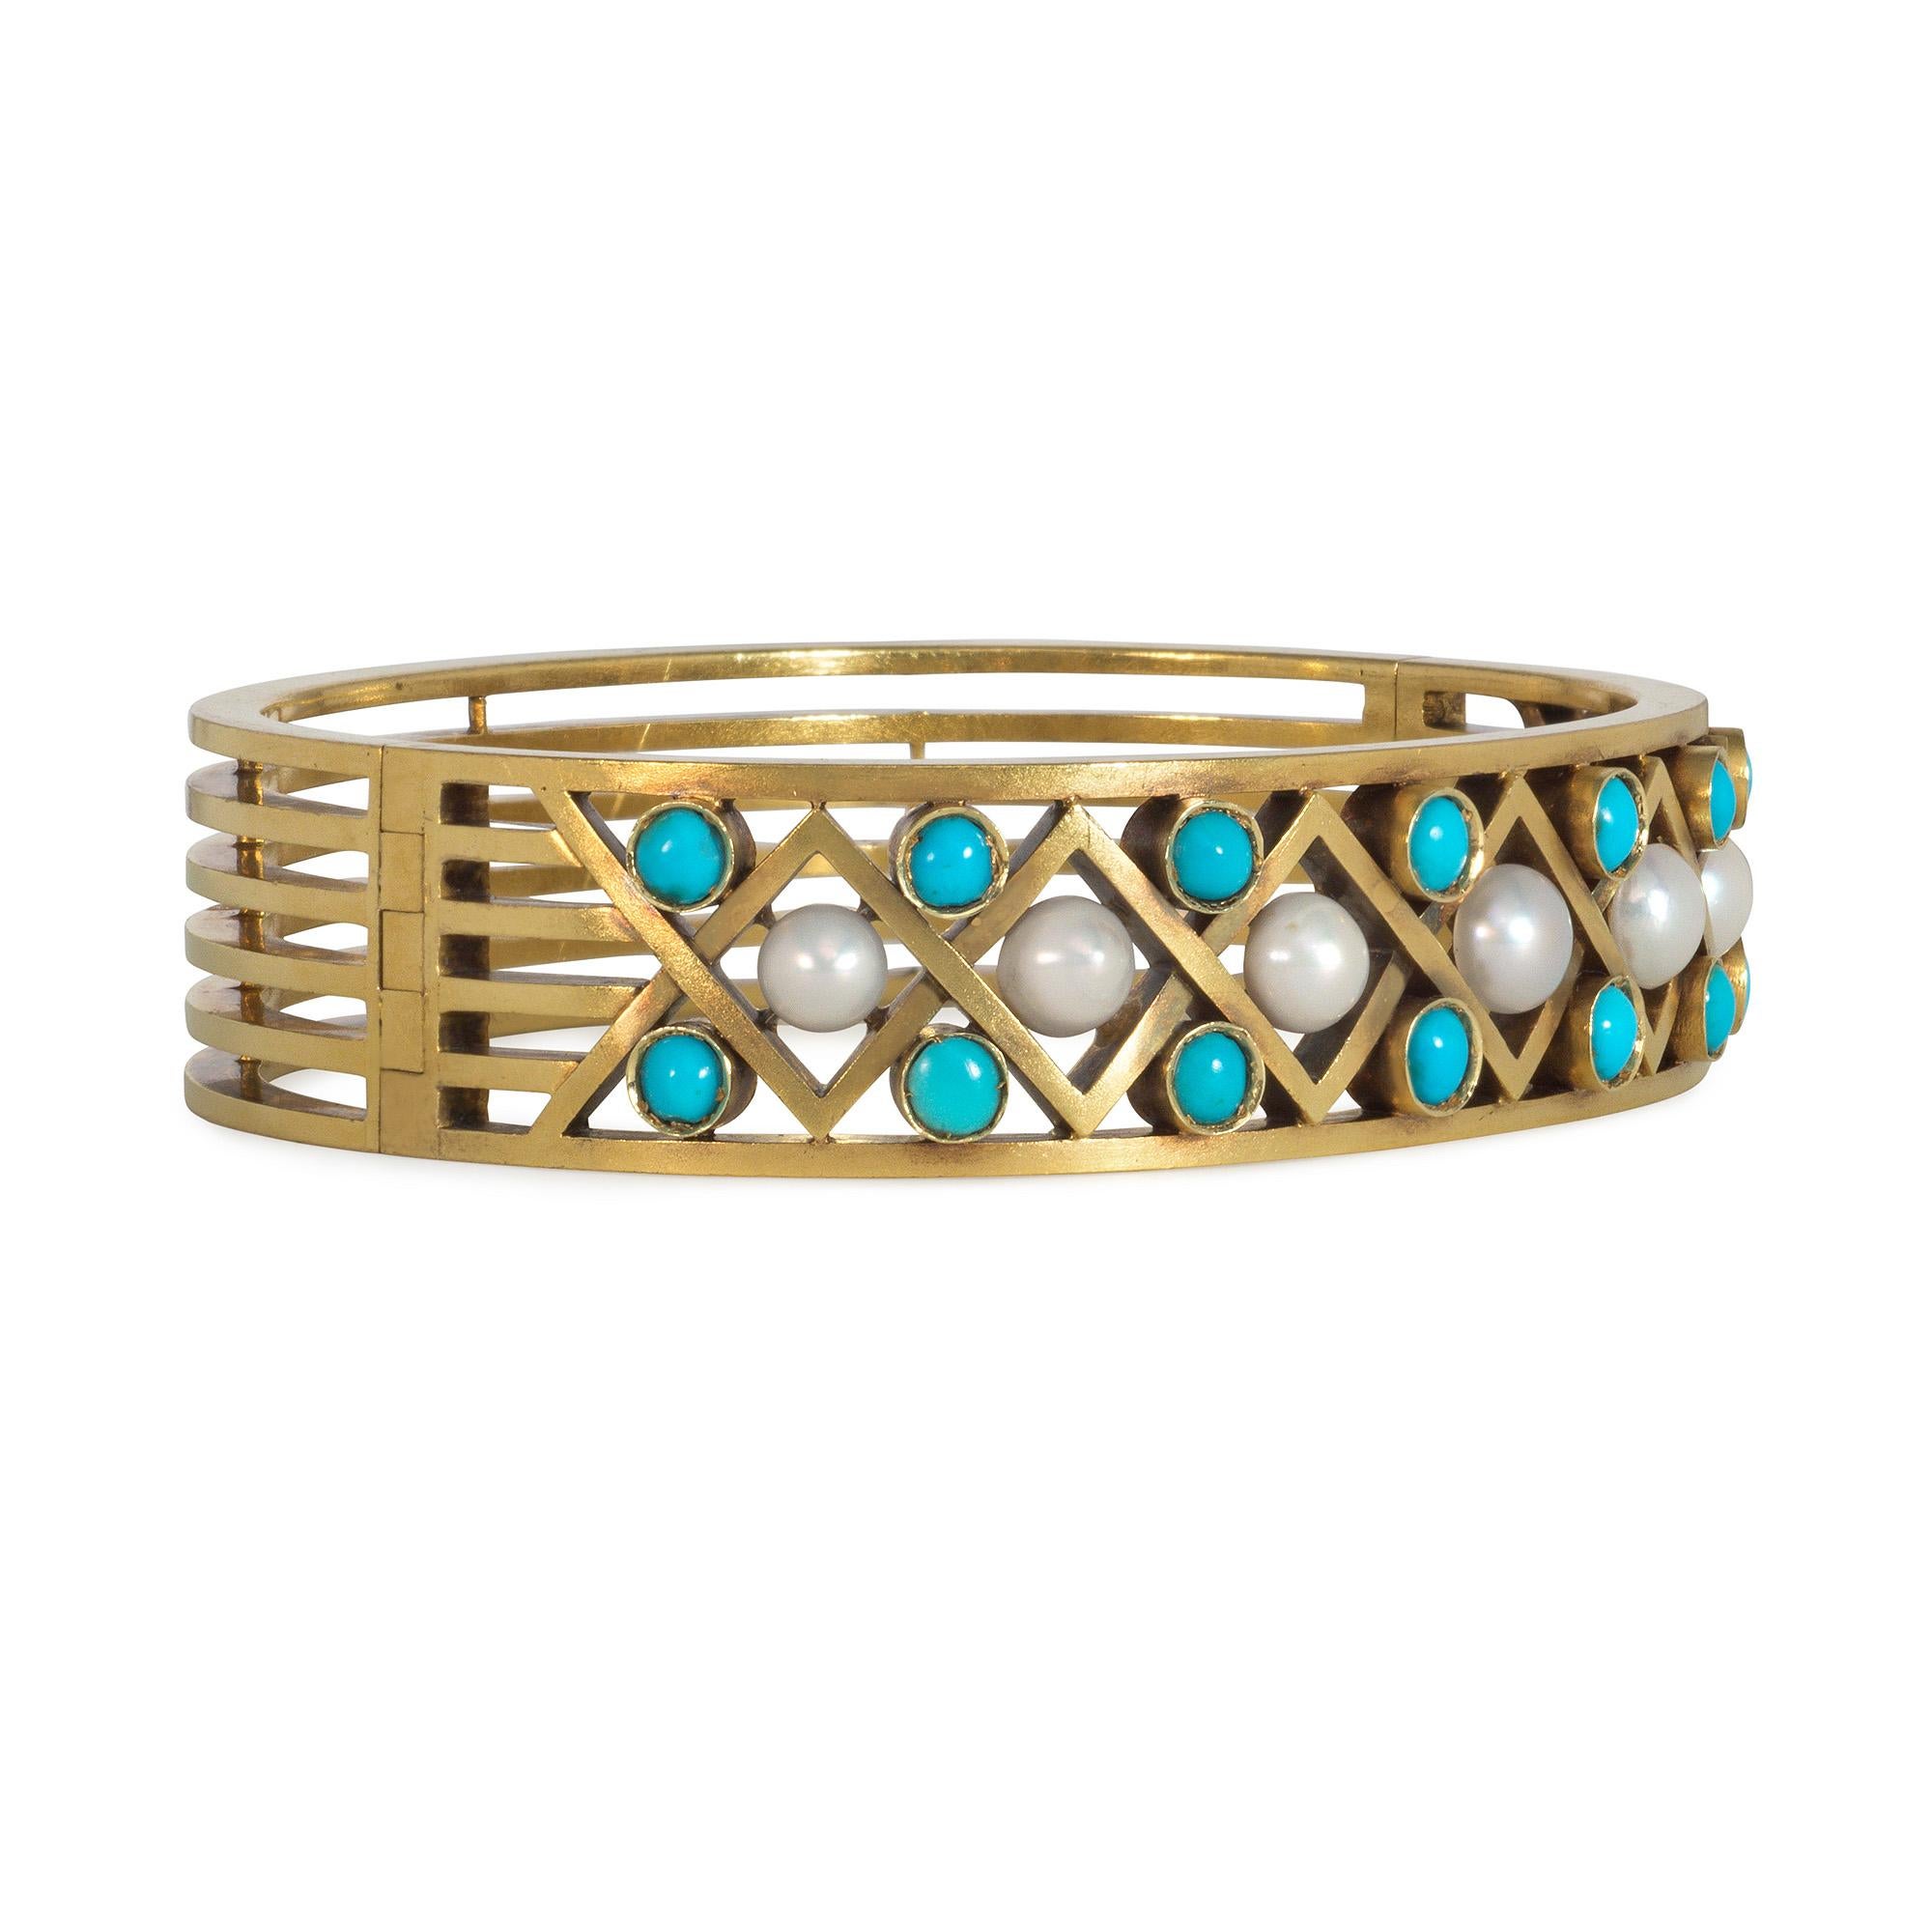 An antique gold cuff bracelet of openwork design with latticed front panel set with half pearls and turquoise cabochons, in 14k.  Russia.

Dimensions: 6 1/2